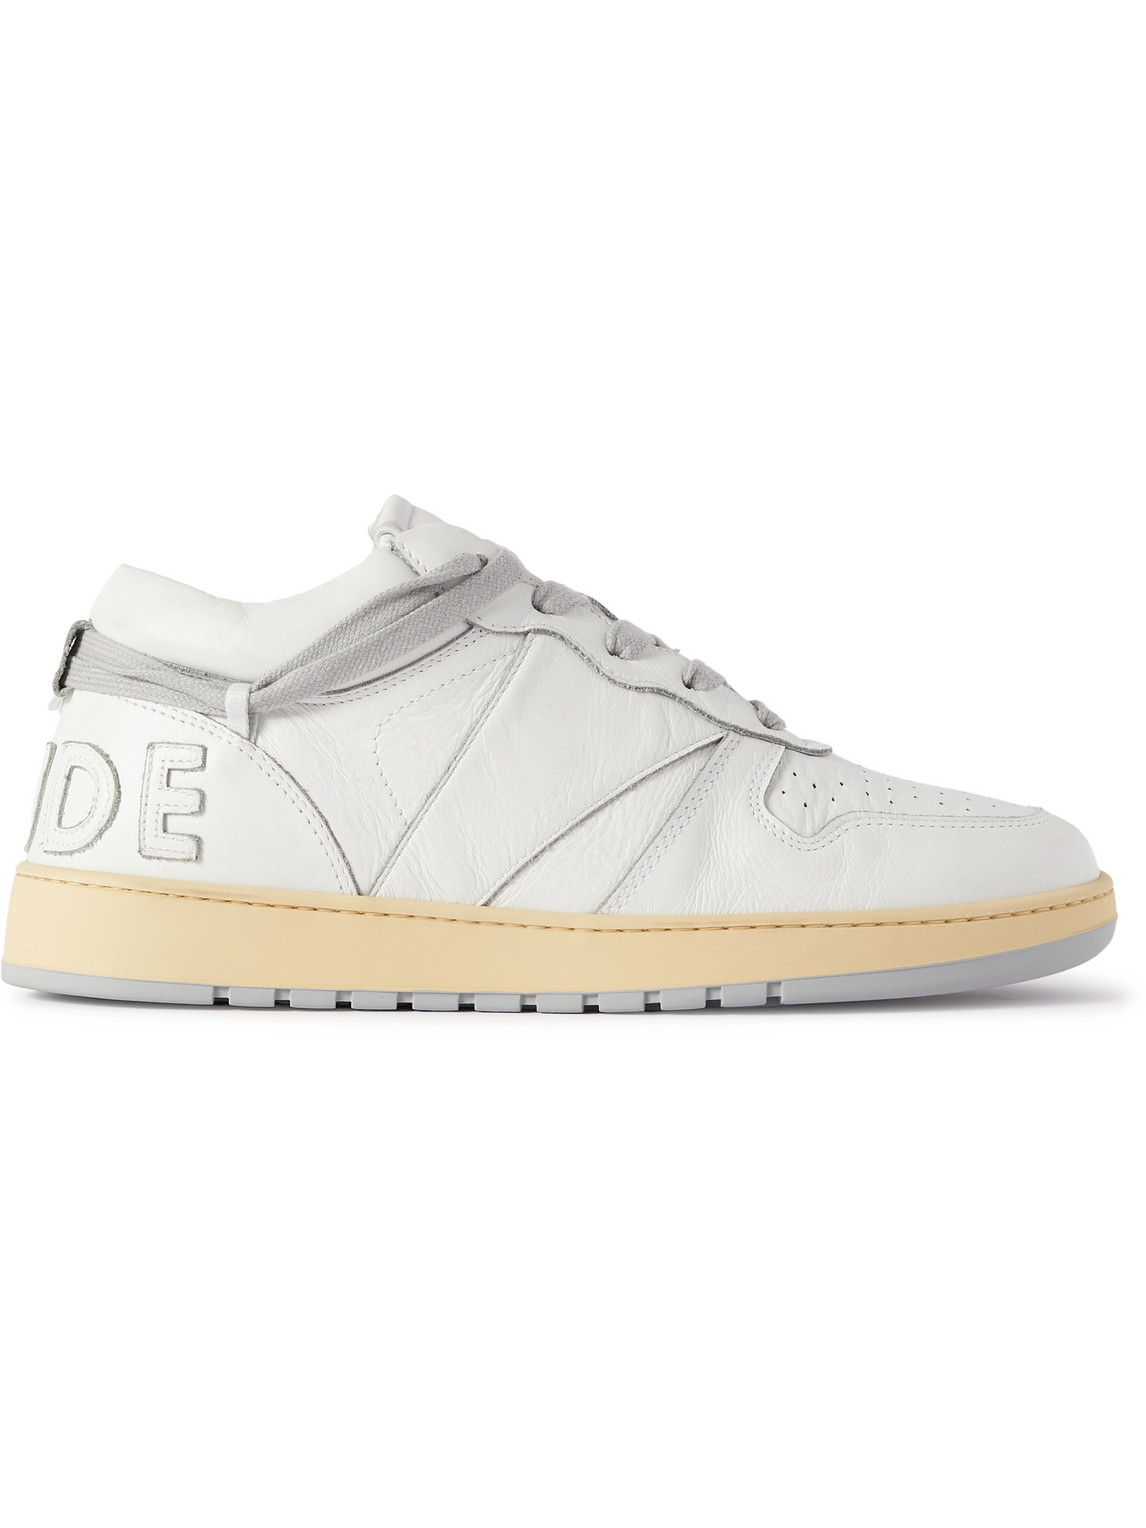 Rhude Rhecess Distressed Leather Sneakers In White